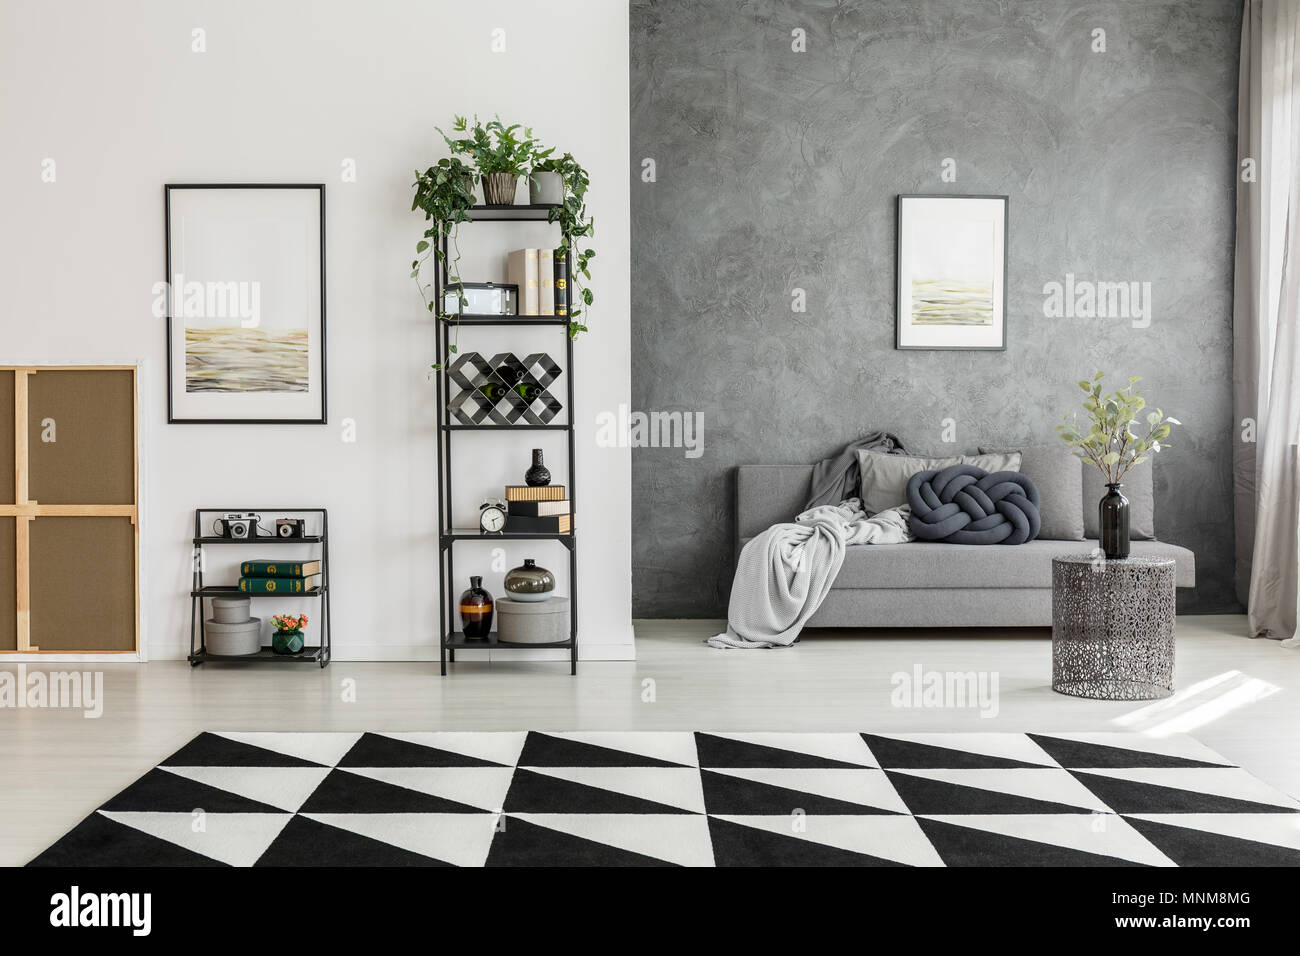 Black and white carpet in spacious living room with posters, grey sofa and  contrast colors walls Stock Photo - Alamy